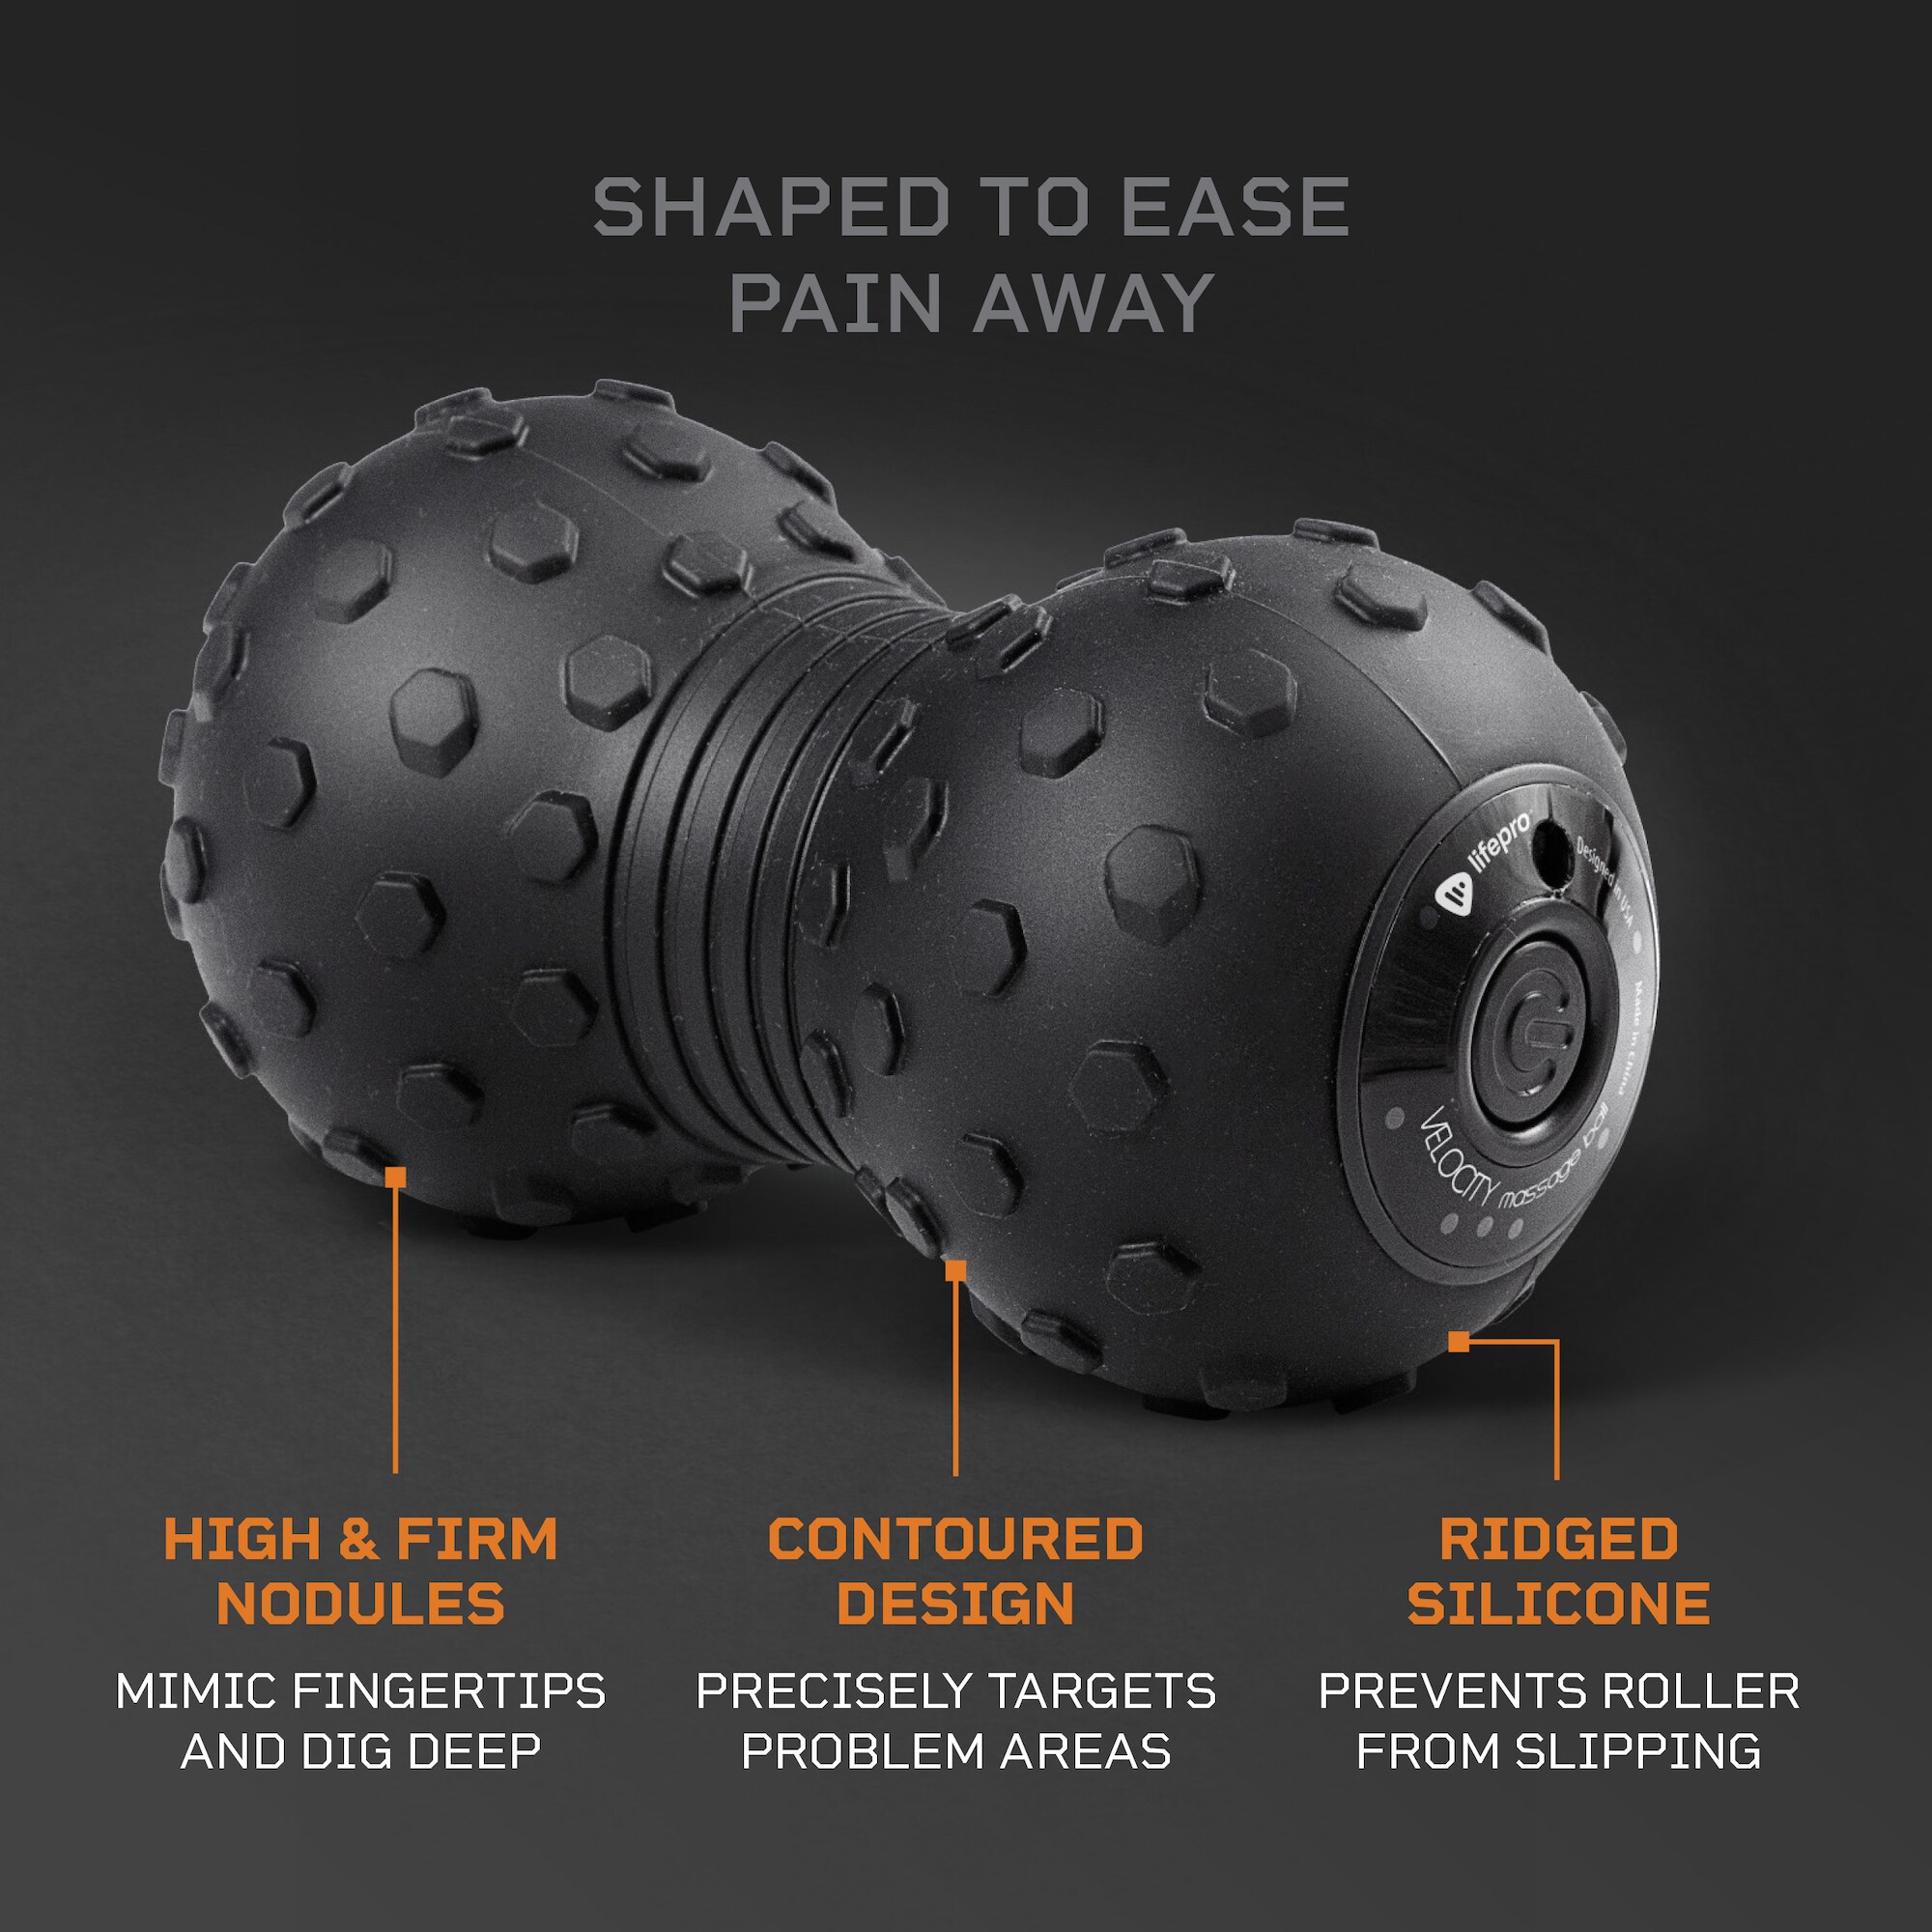 Lifepro Fitness Velocity Vibrating Ball 2 Battery Operated Massage Ball In The Stretching